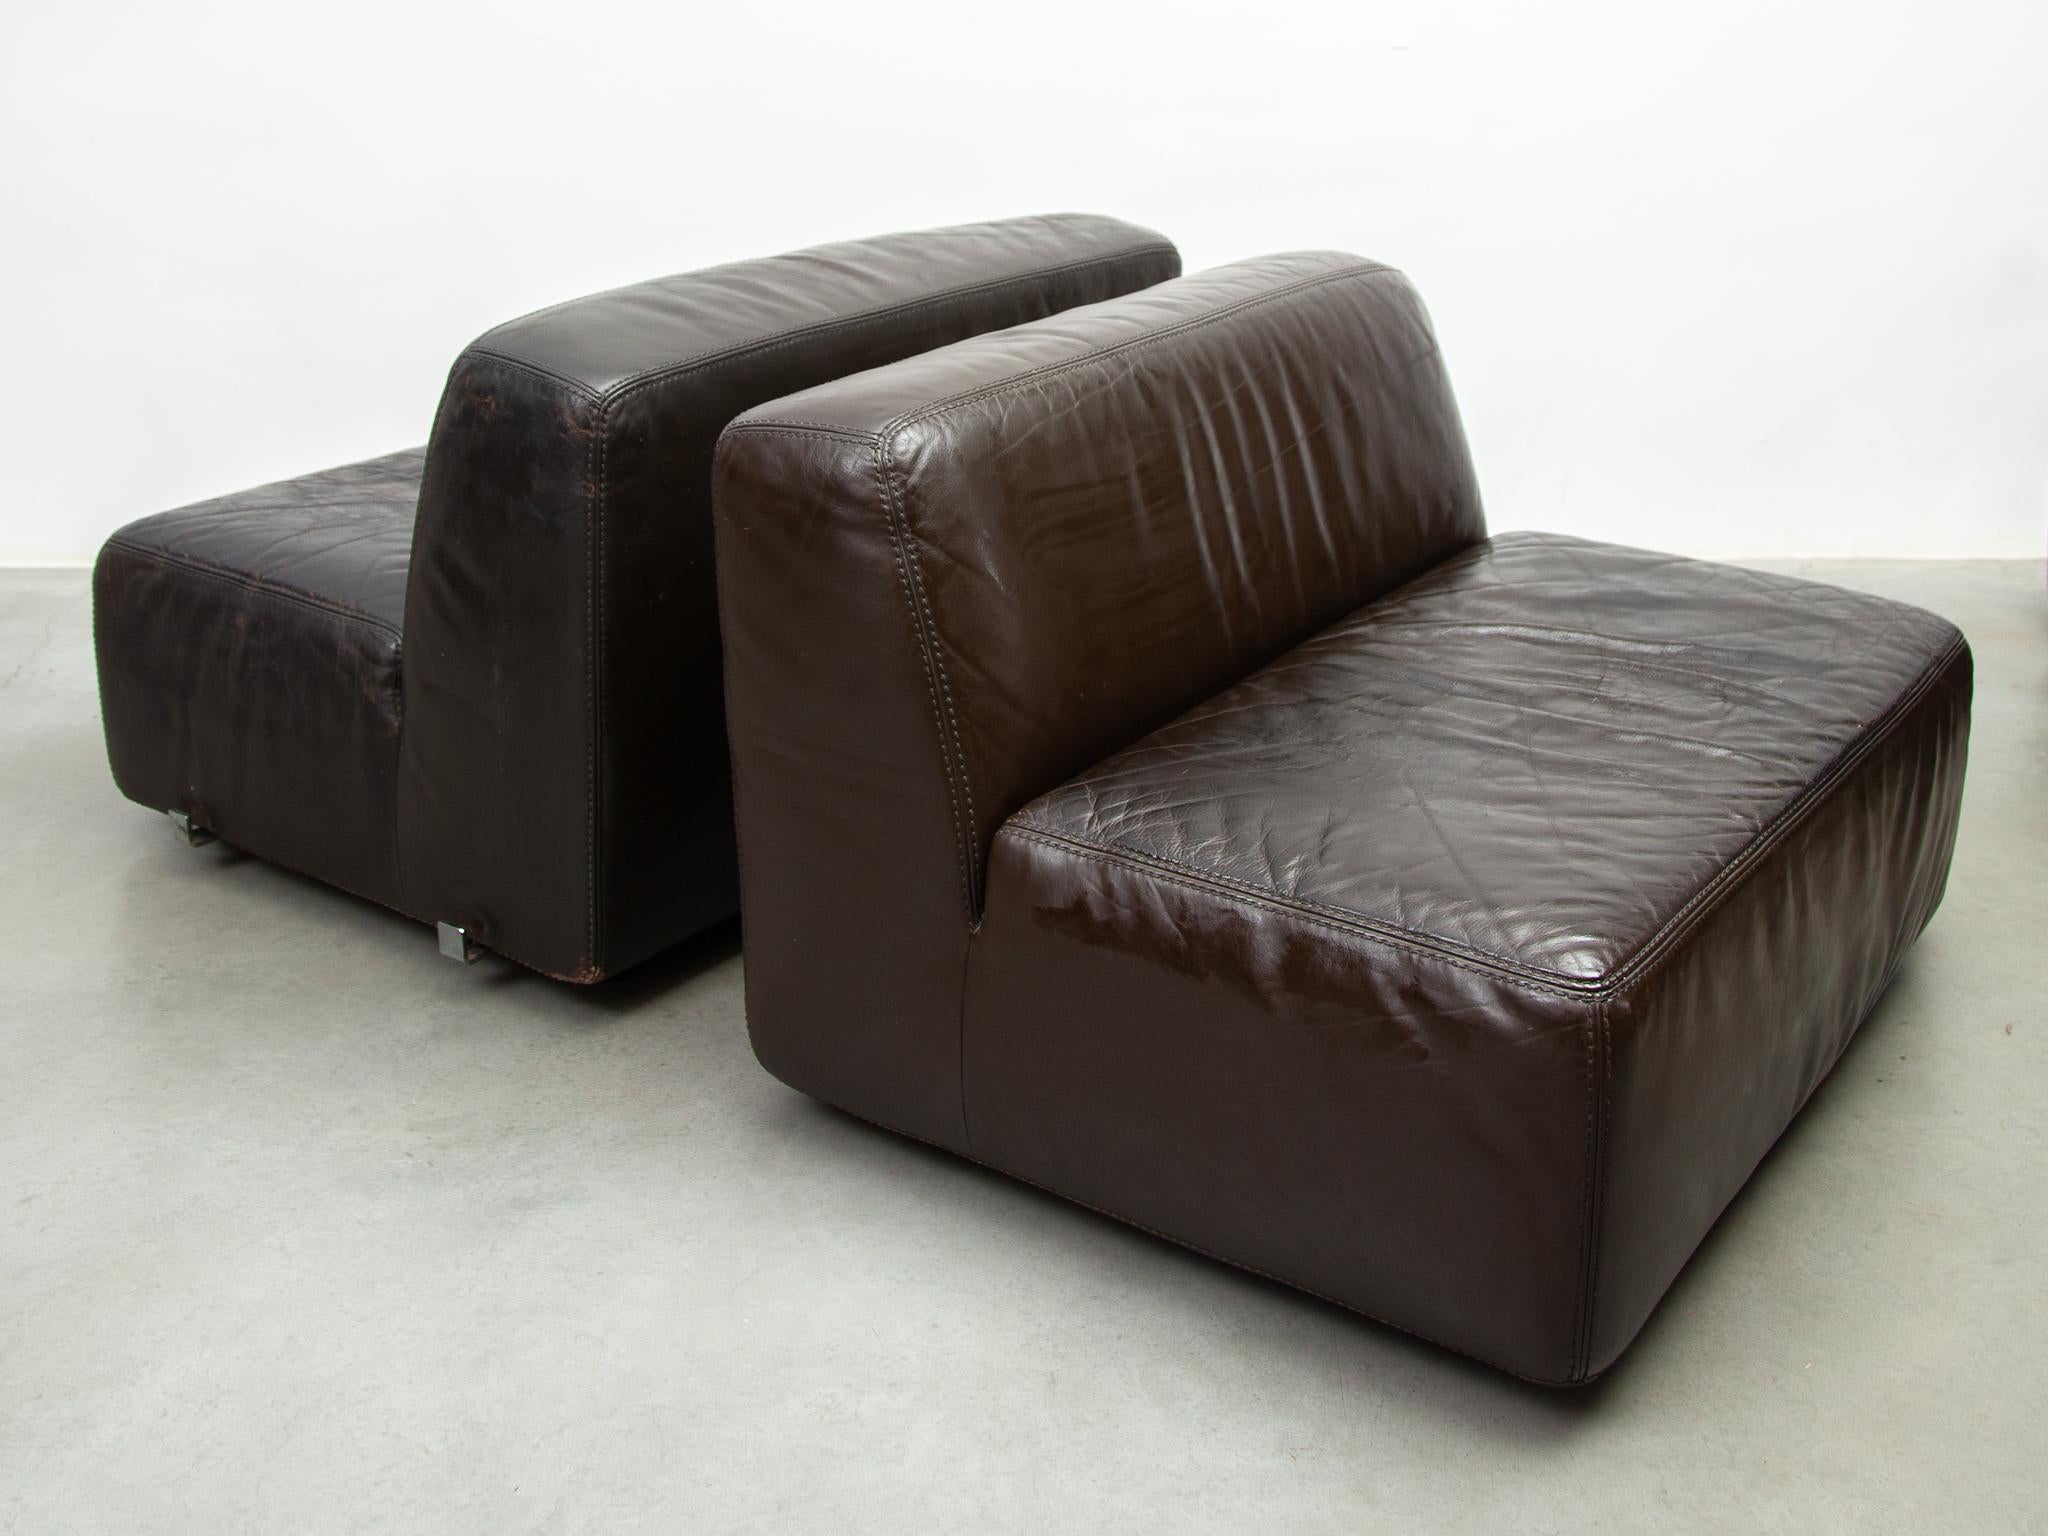 Modular Sofa 1970s Brown Leather designed by Durlet For Sale 9